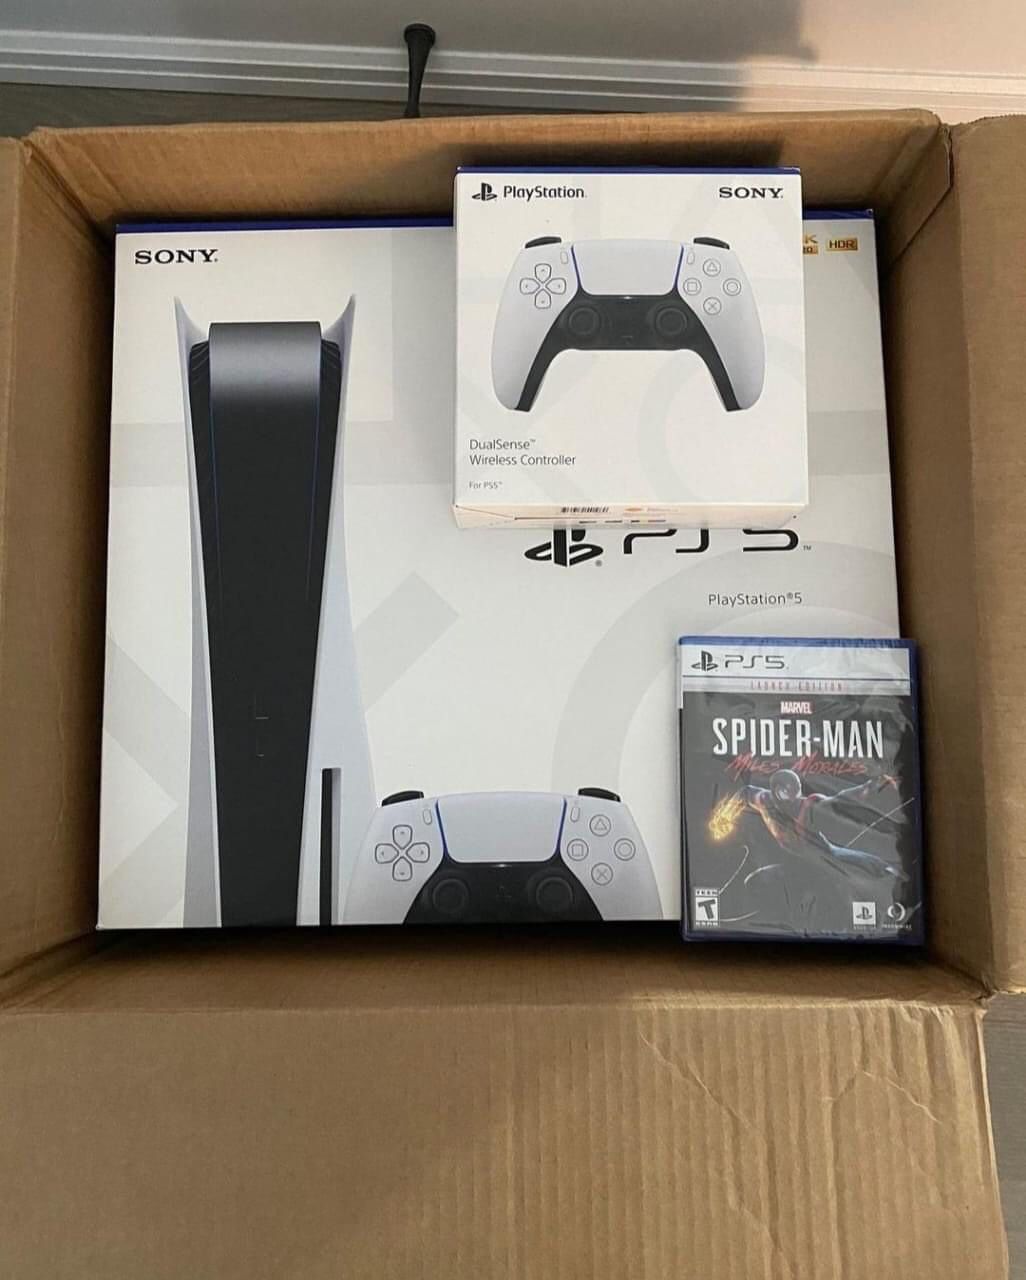 Sony Playstation 5 Ps5 Console Disc Version And Extras For Sale In